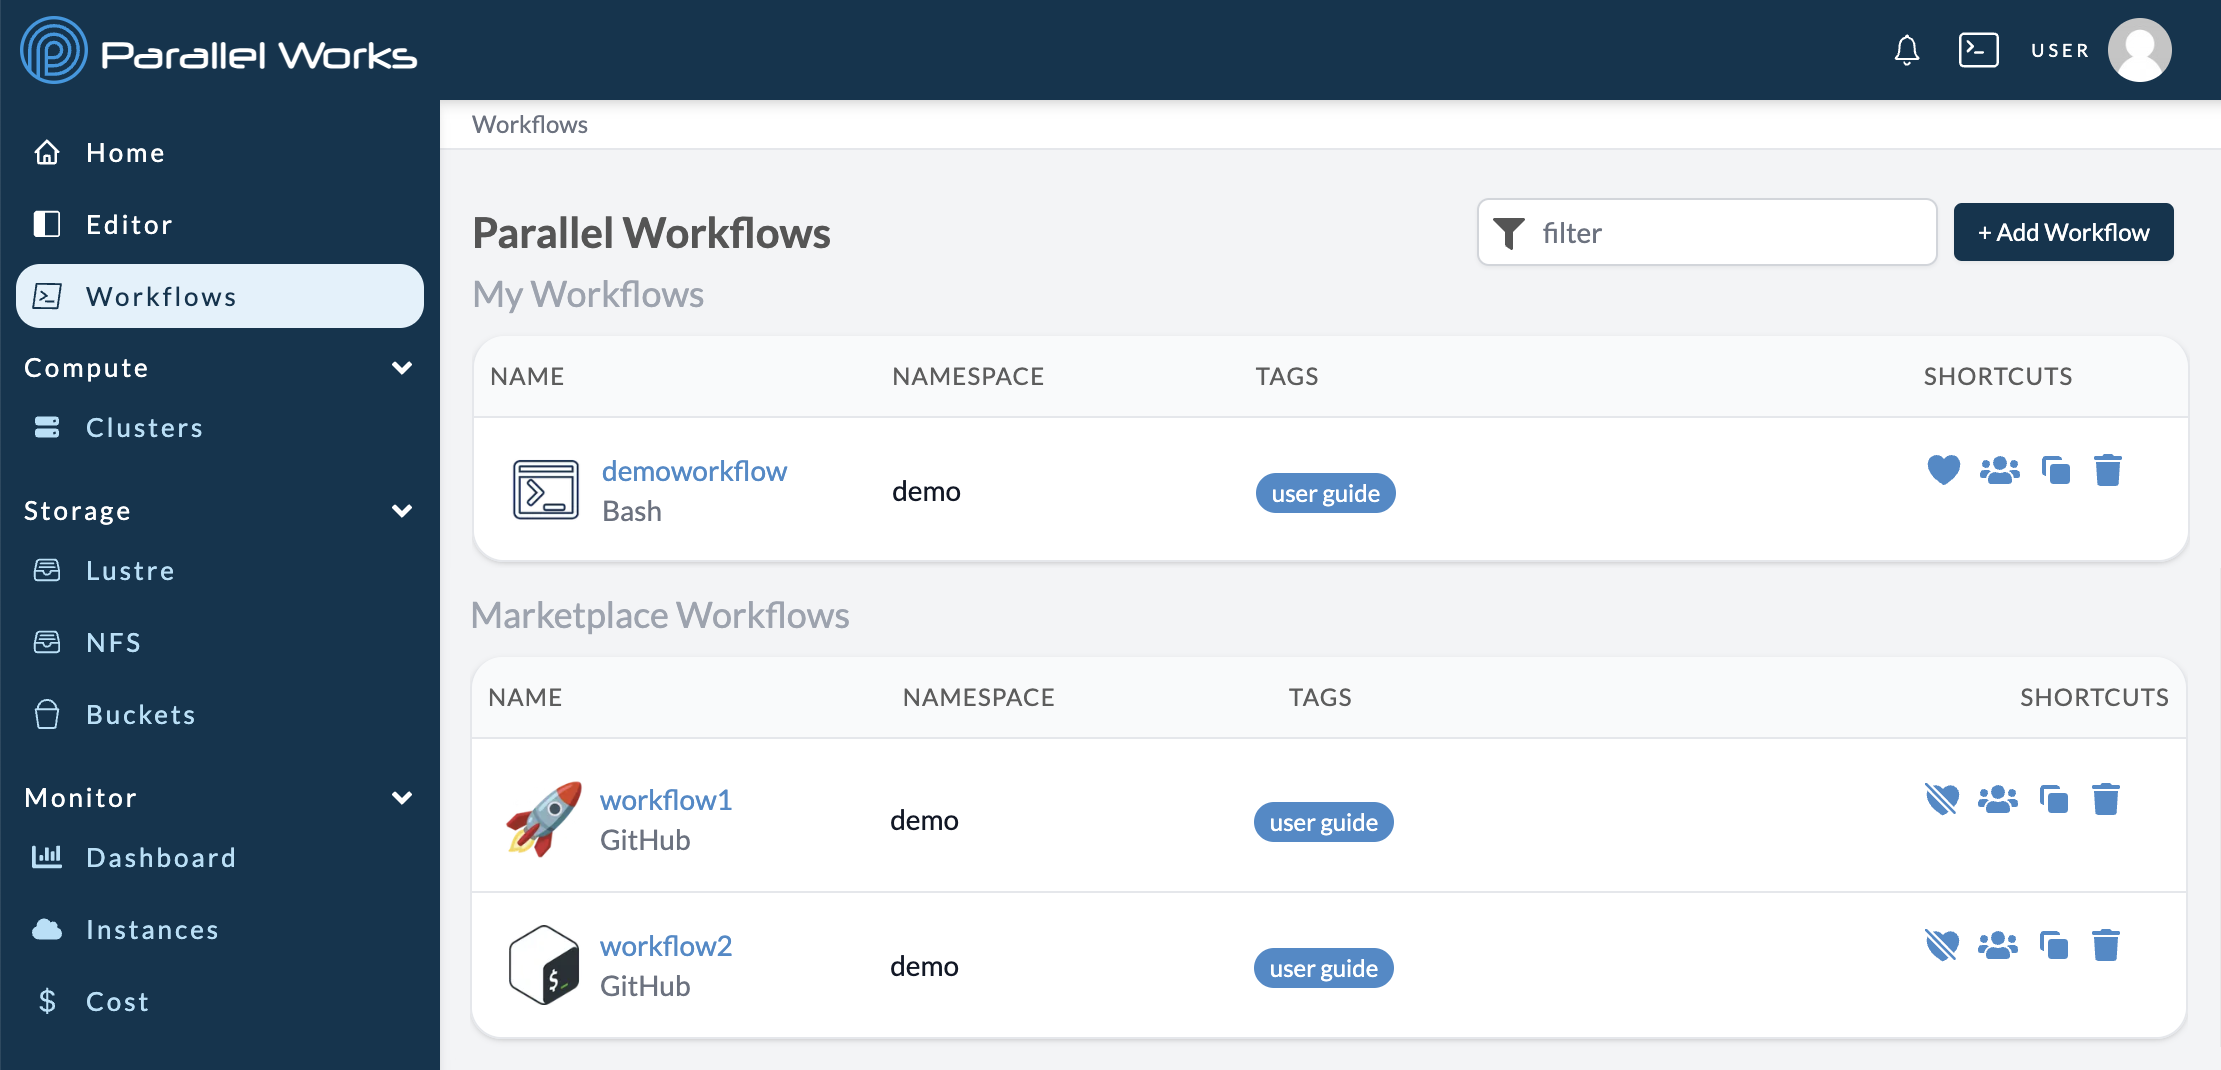 Screenshot of the Workflows page immediately after selecting Workflows.